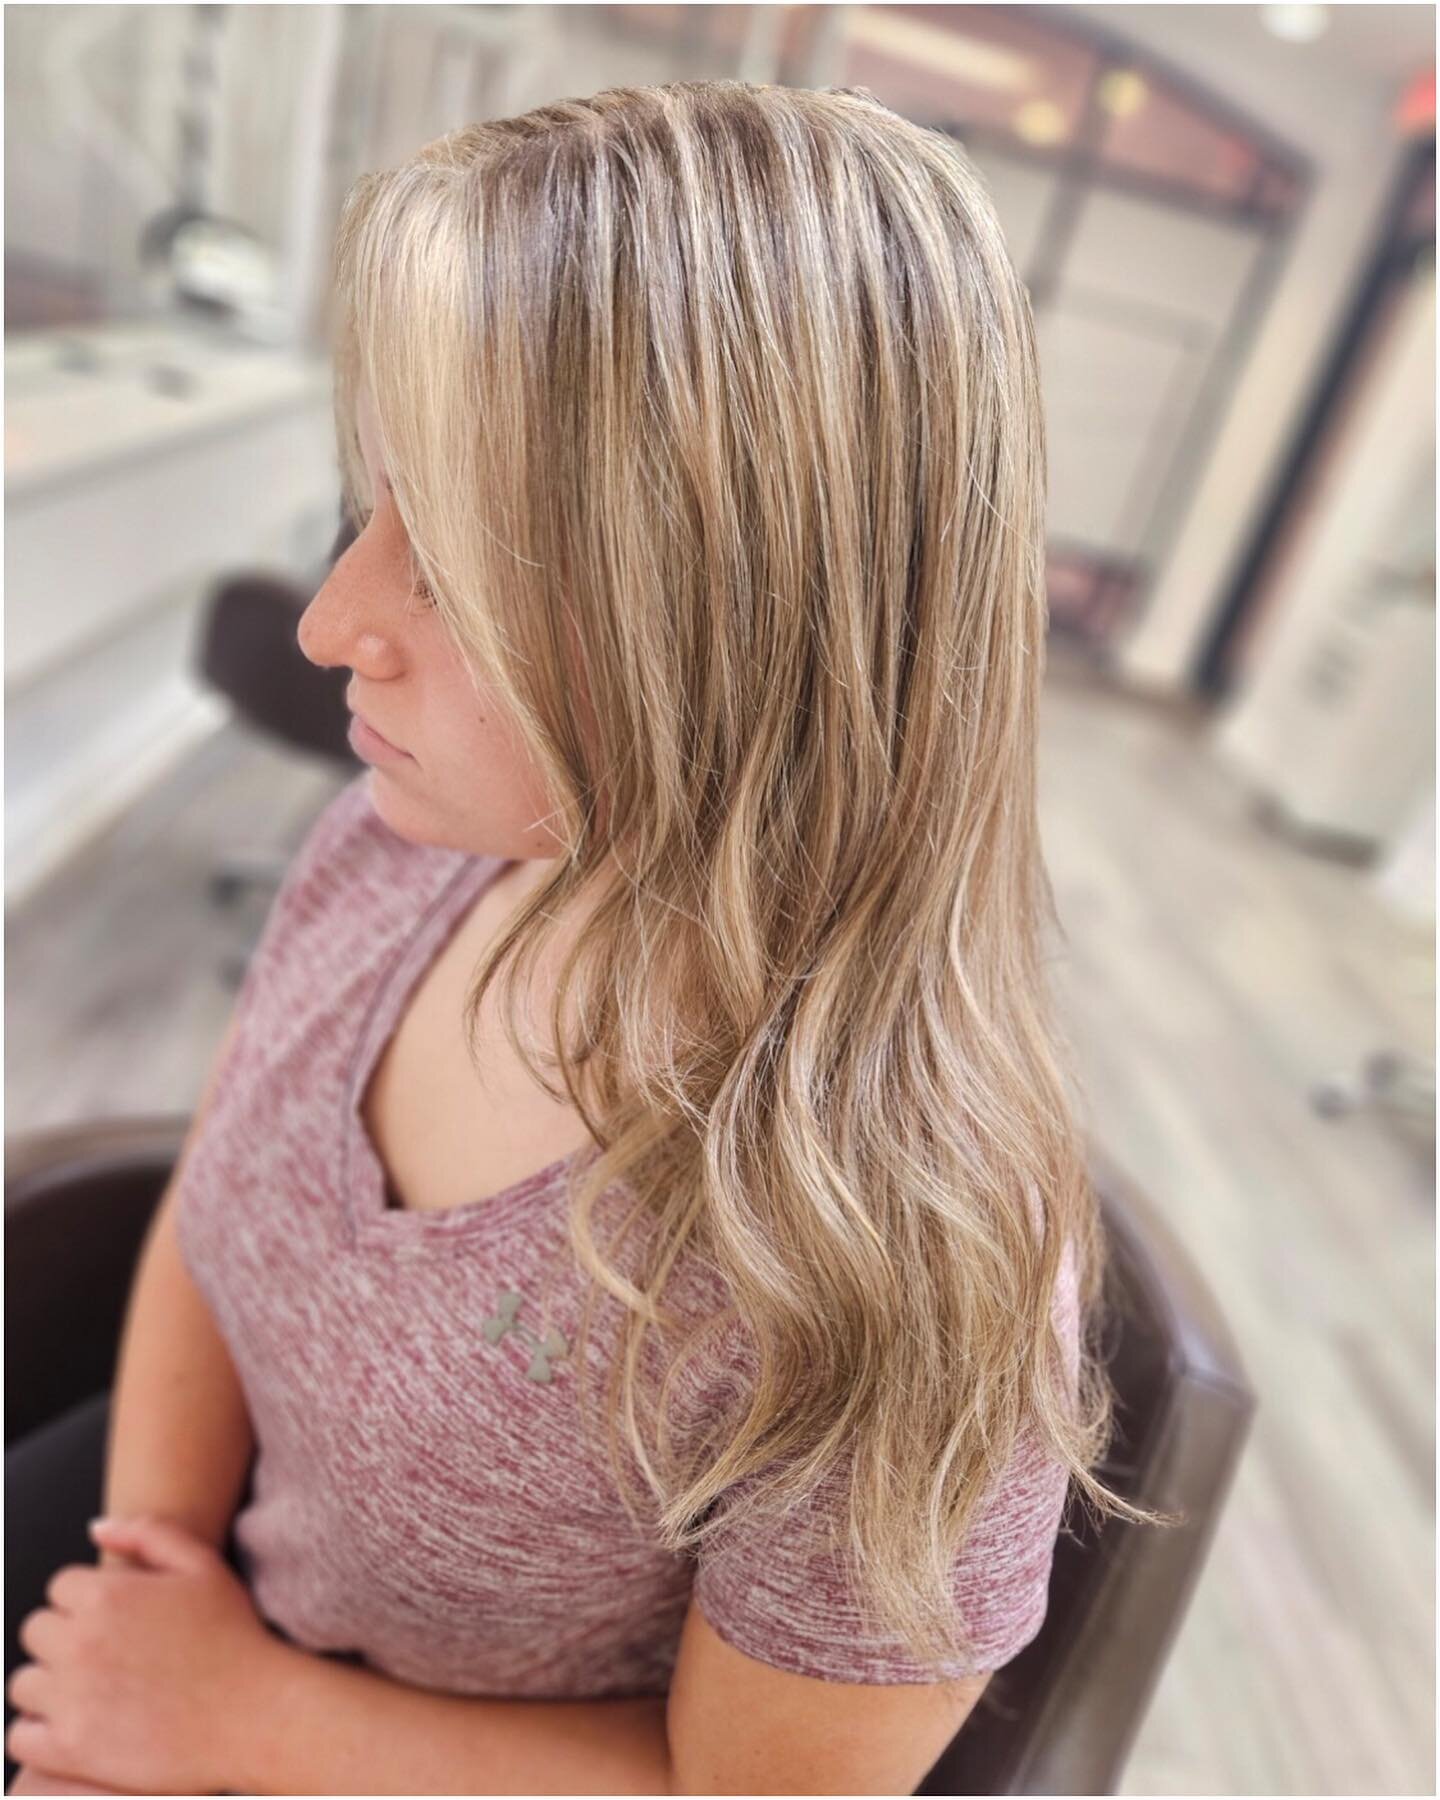 highlight, cut &amp; style | by Cristin F (&hellip;with Olaplex of course!)
&bull;
&bull;
&bull;
#themakeupstudiony #thestudiony #hair #highlights #highlightedhair #blonde #olaplex #olaplextreatment #haircut #haircutsforwomen #hairstyle #hairstylist 